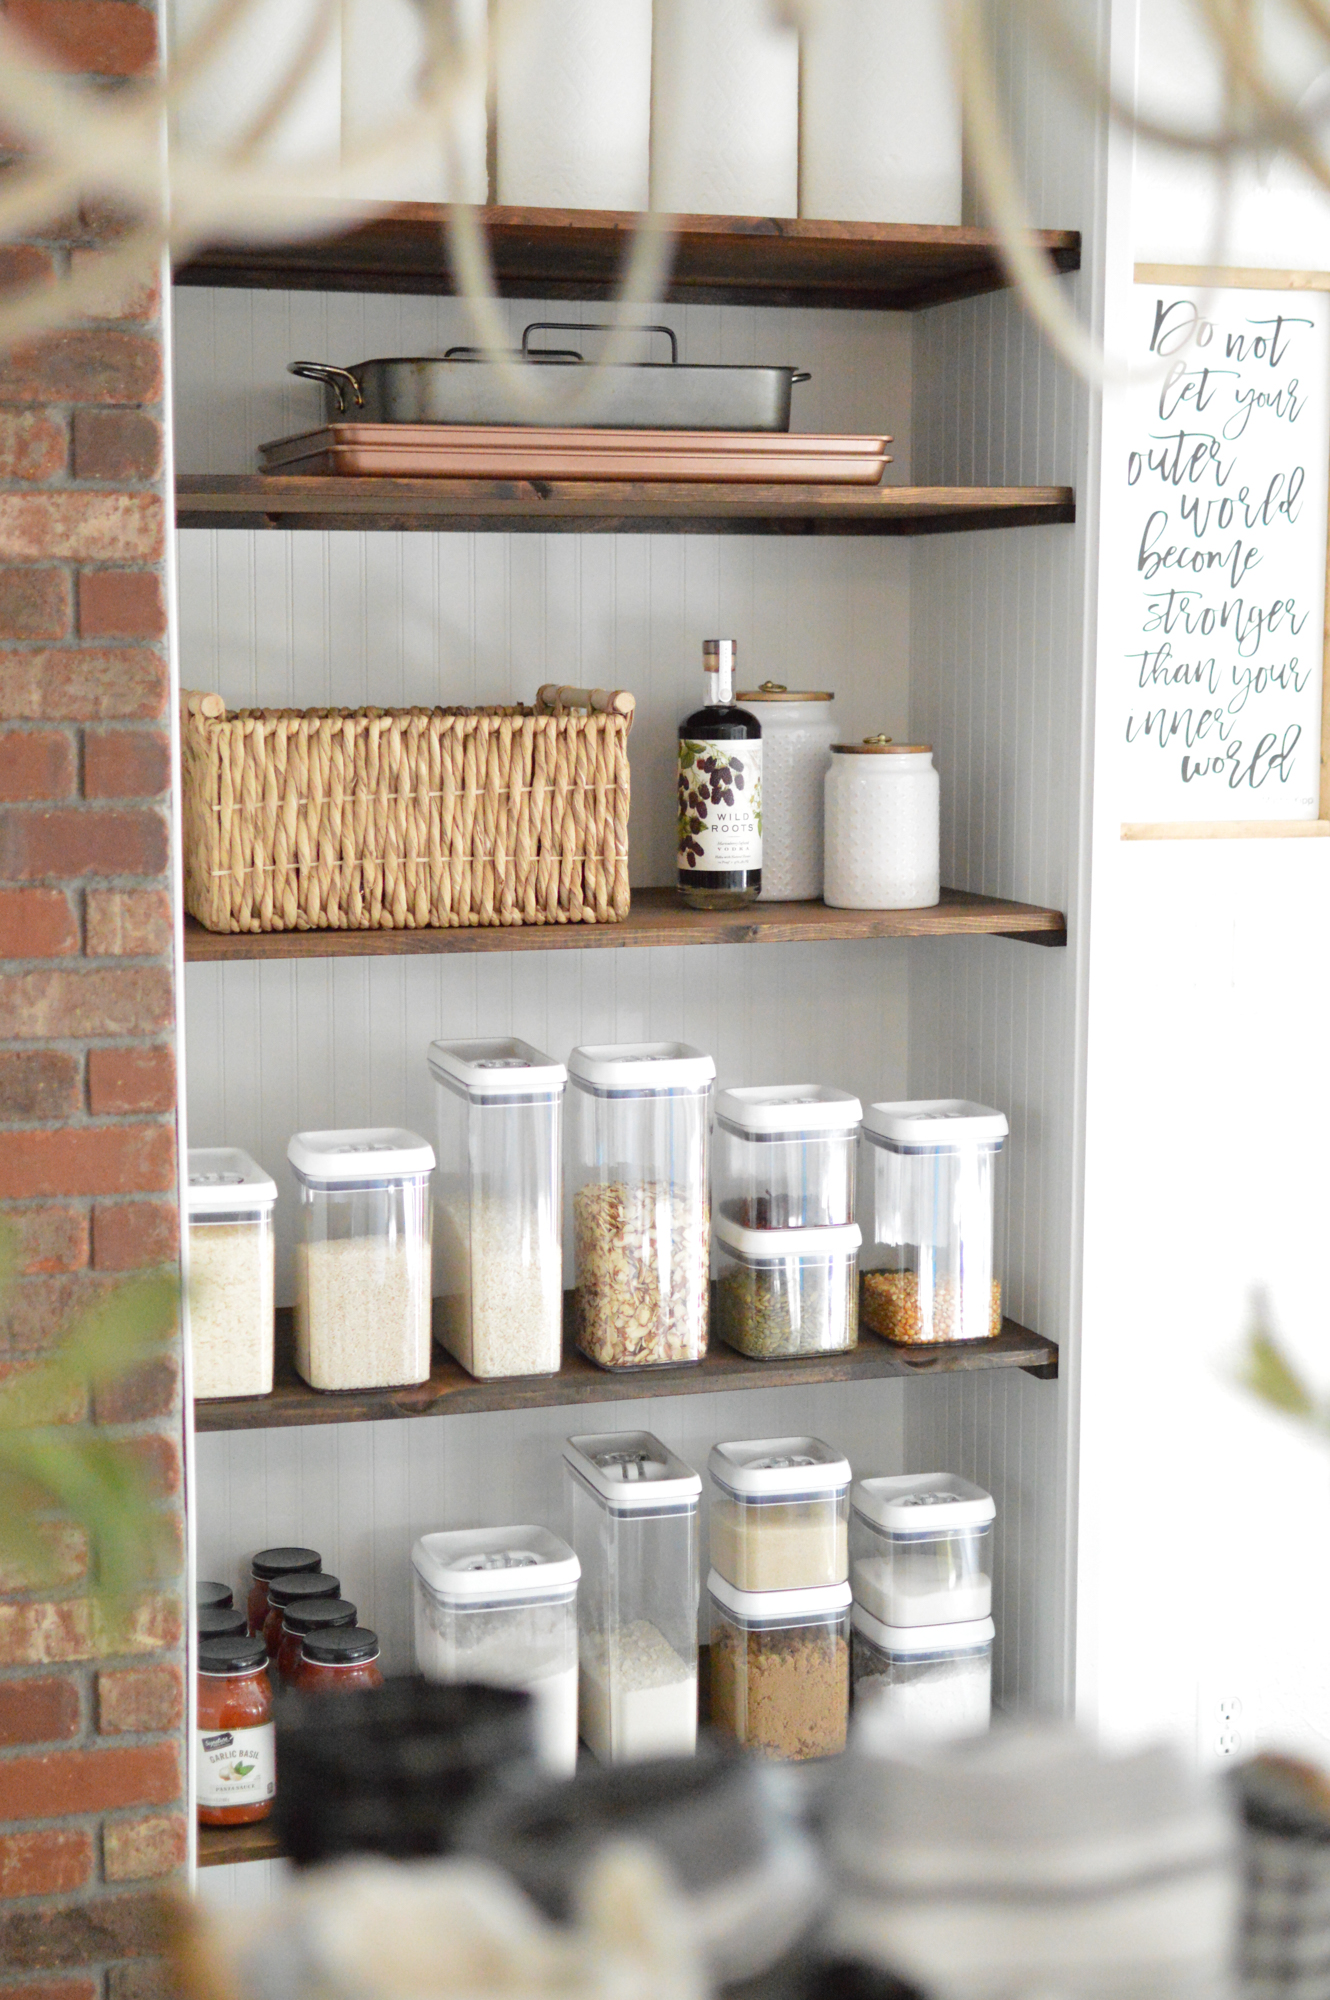 How To Organize Your Kitchen Utensils - Fox Hollow Cottage